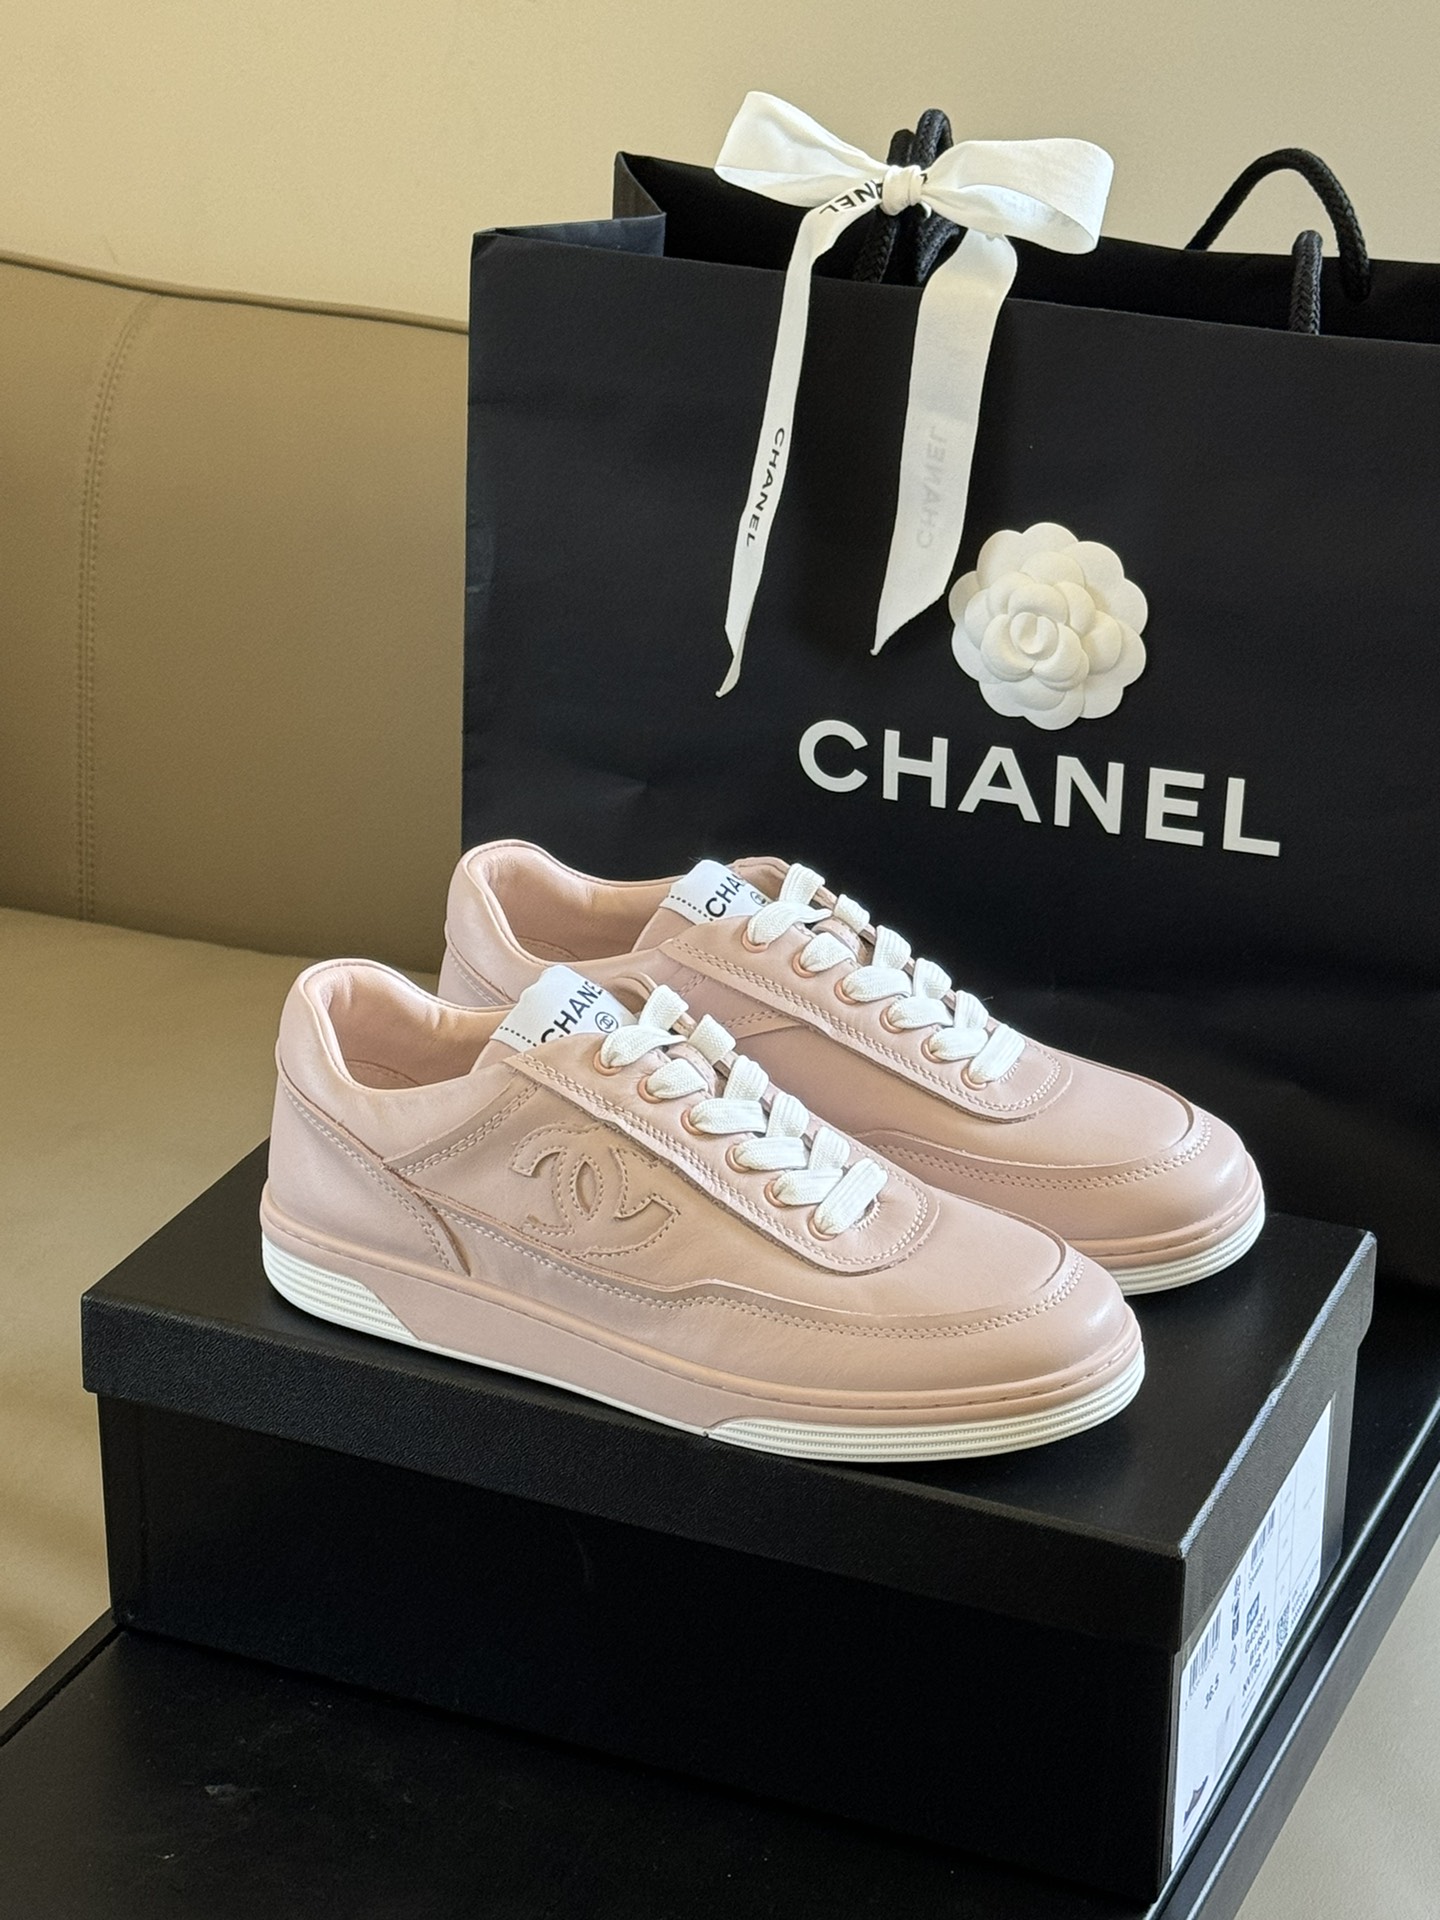 Chanel Skateboard Shoes Pink Calfskin Cowhide Spring/Summer Collection rmb10100